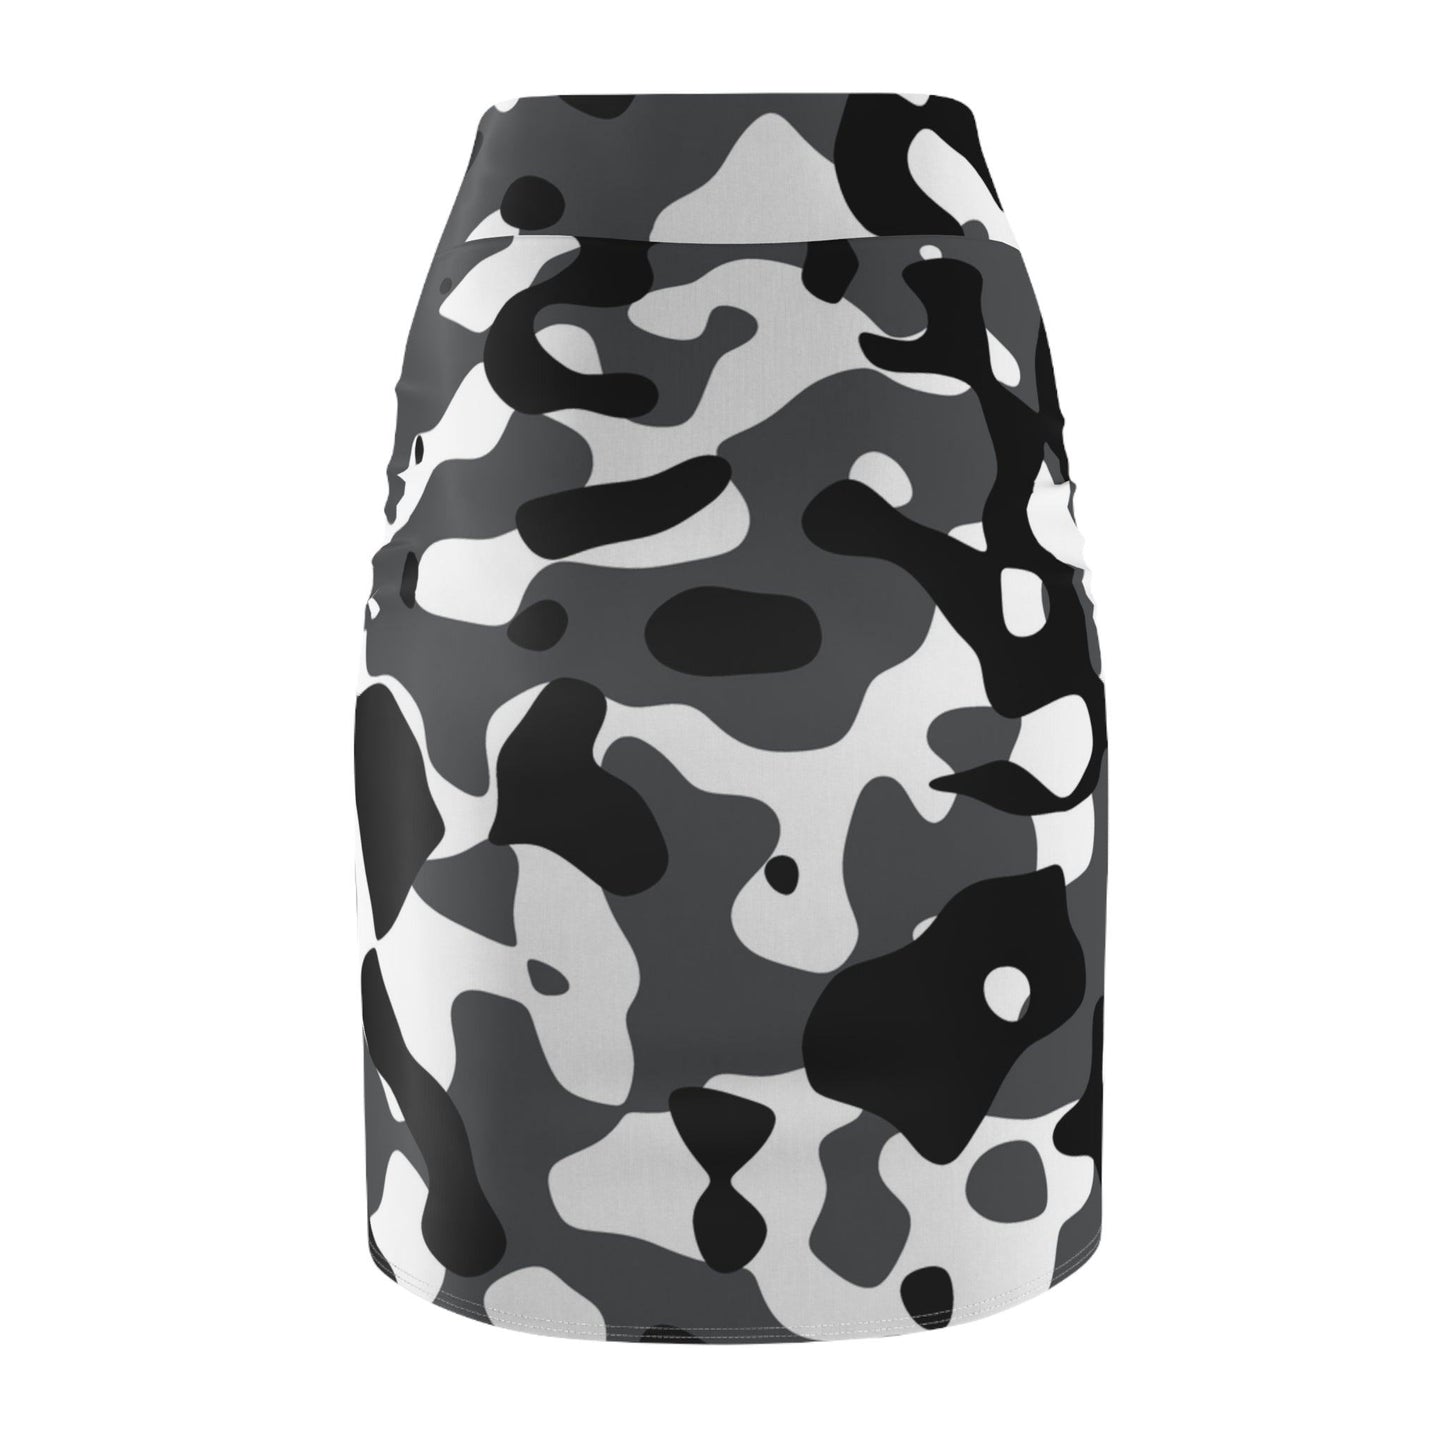 Schwarz Grau Weiß Camouflage Bleistiftrock All Over Prints 74.99 All Over Print, AOP, AOP Clothing, Assembled in the USA, Assembled in USA, Bleistiftrock, Camouflage, Grau, Made in the USA, Made in USA, Schwarz, Skirts & Dresses, Sublimation, Weiß, Women's Clothing JLR Design